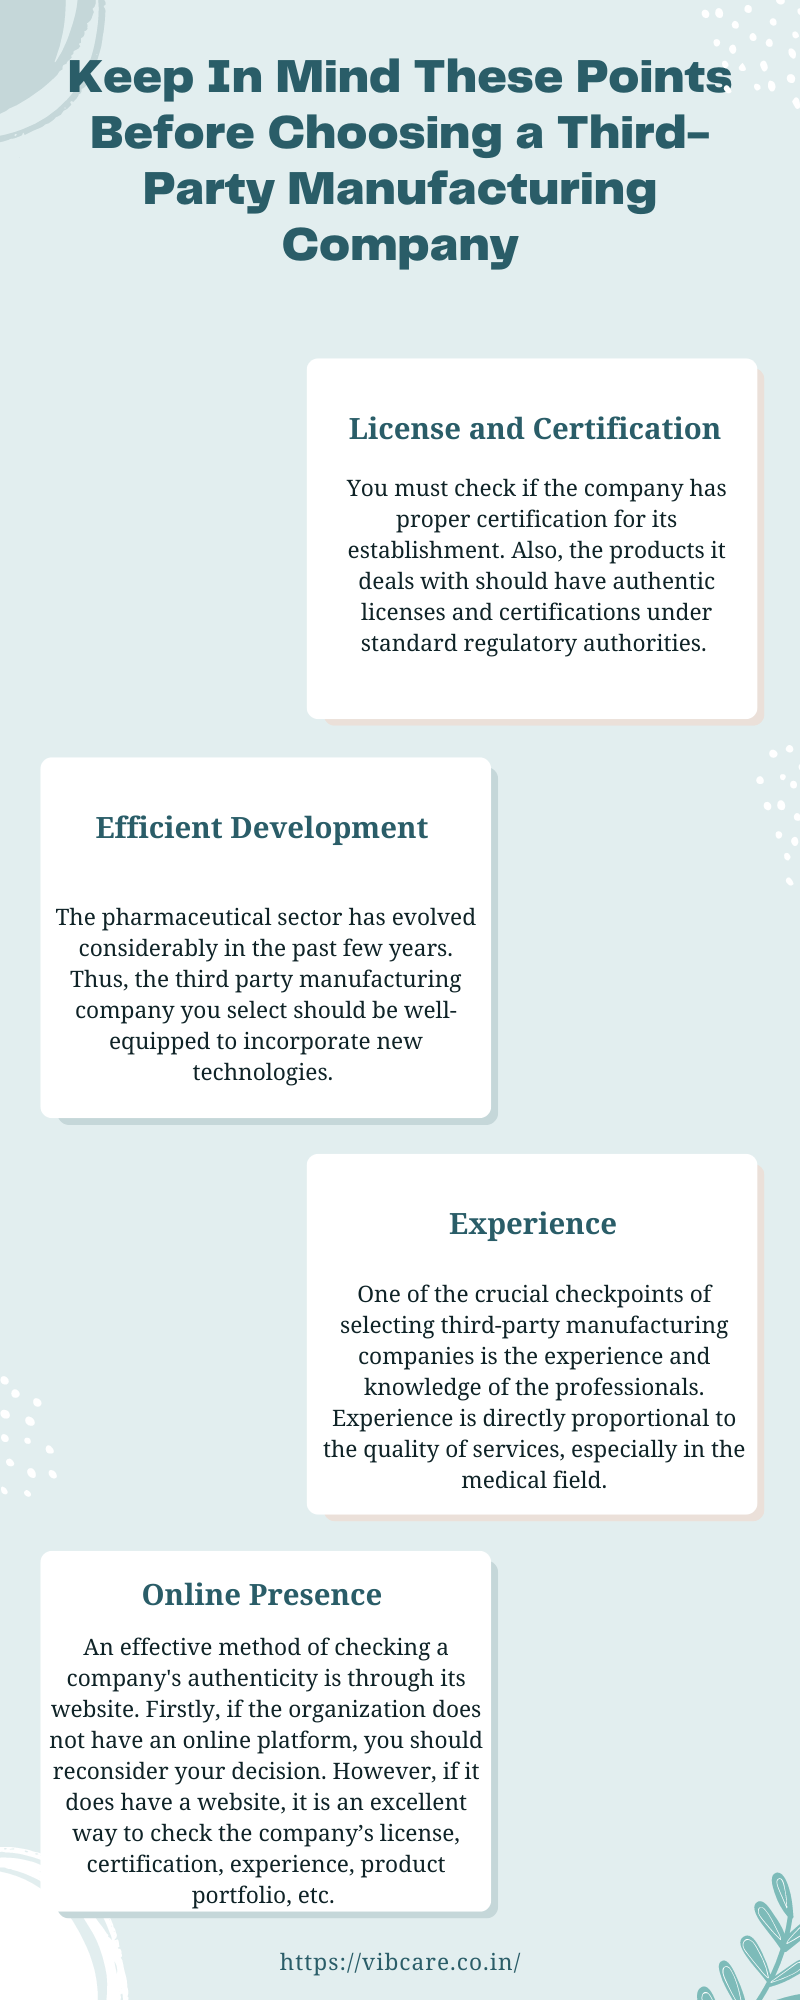 Keep In Mind These Points Before Choosing aThird-Party Manufacturing Company Third-party manufacturing companies playa crucial role in maintaining healthcare services. For example, large pharma companies anchor their trust and branding rights to these firms, which do proper justice by providing efficient services.  https://vibcare by vibcarepharma